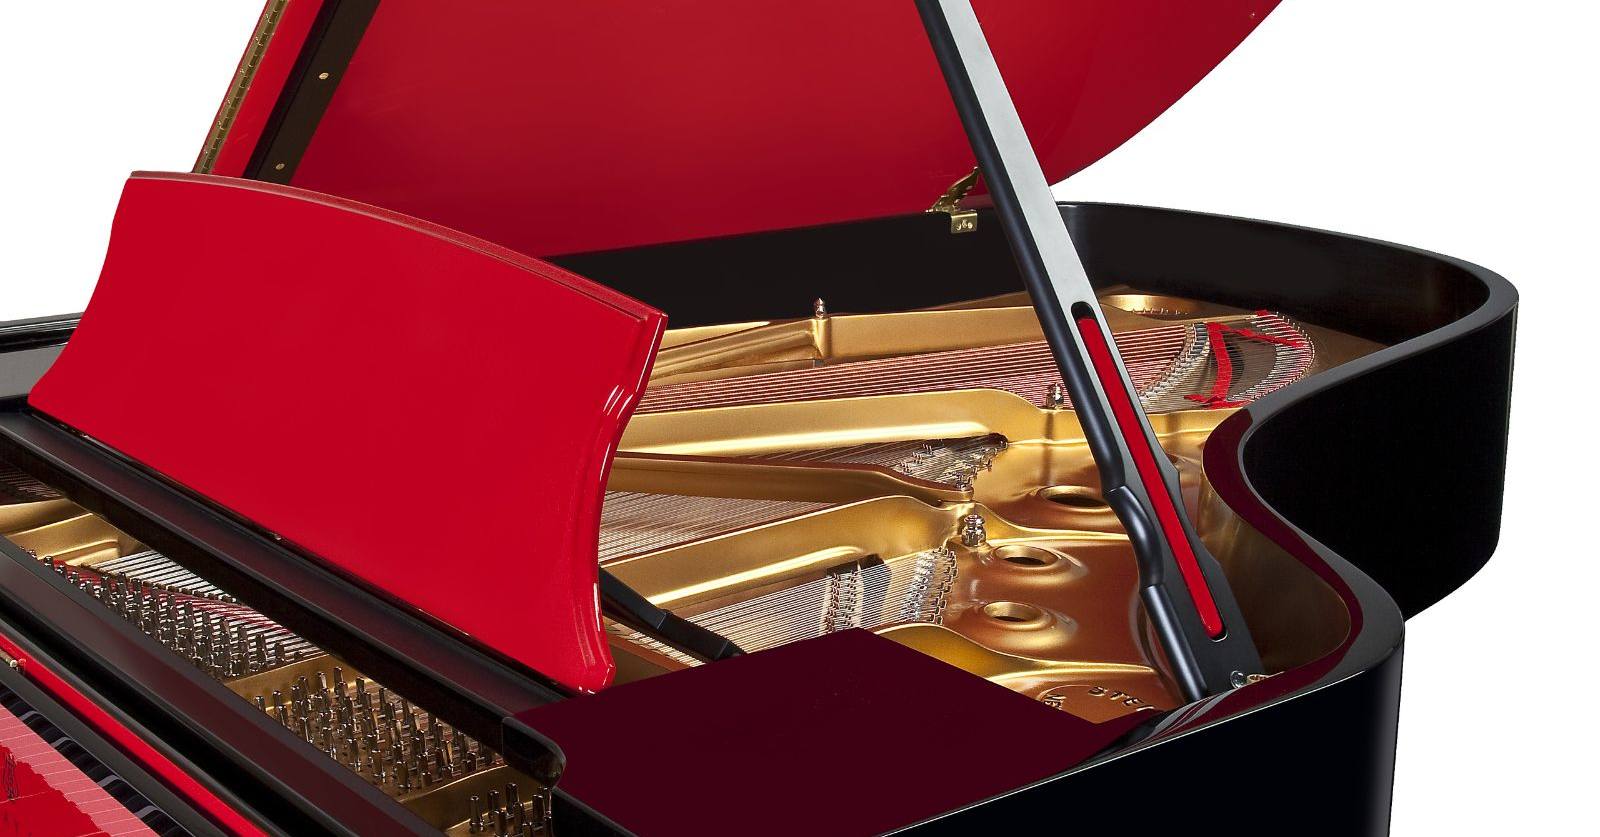 The Steinway Red pops for (Red)